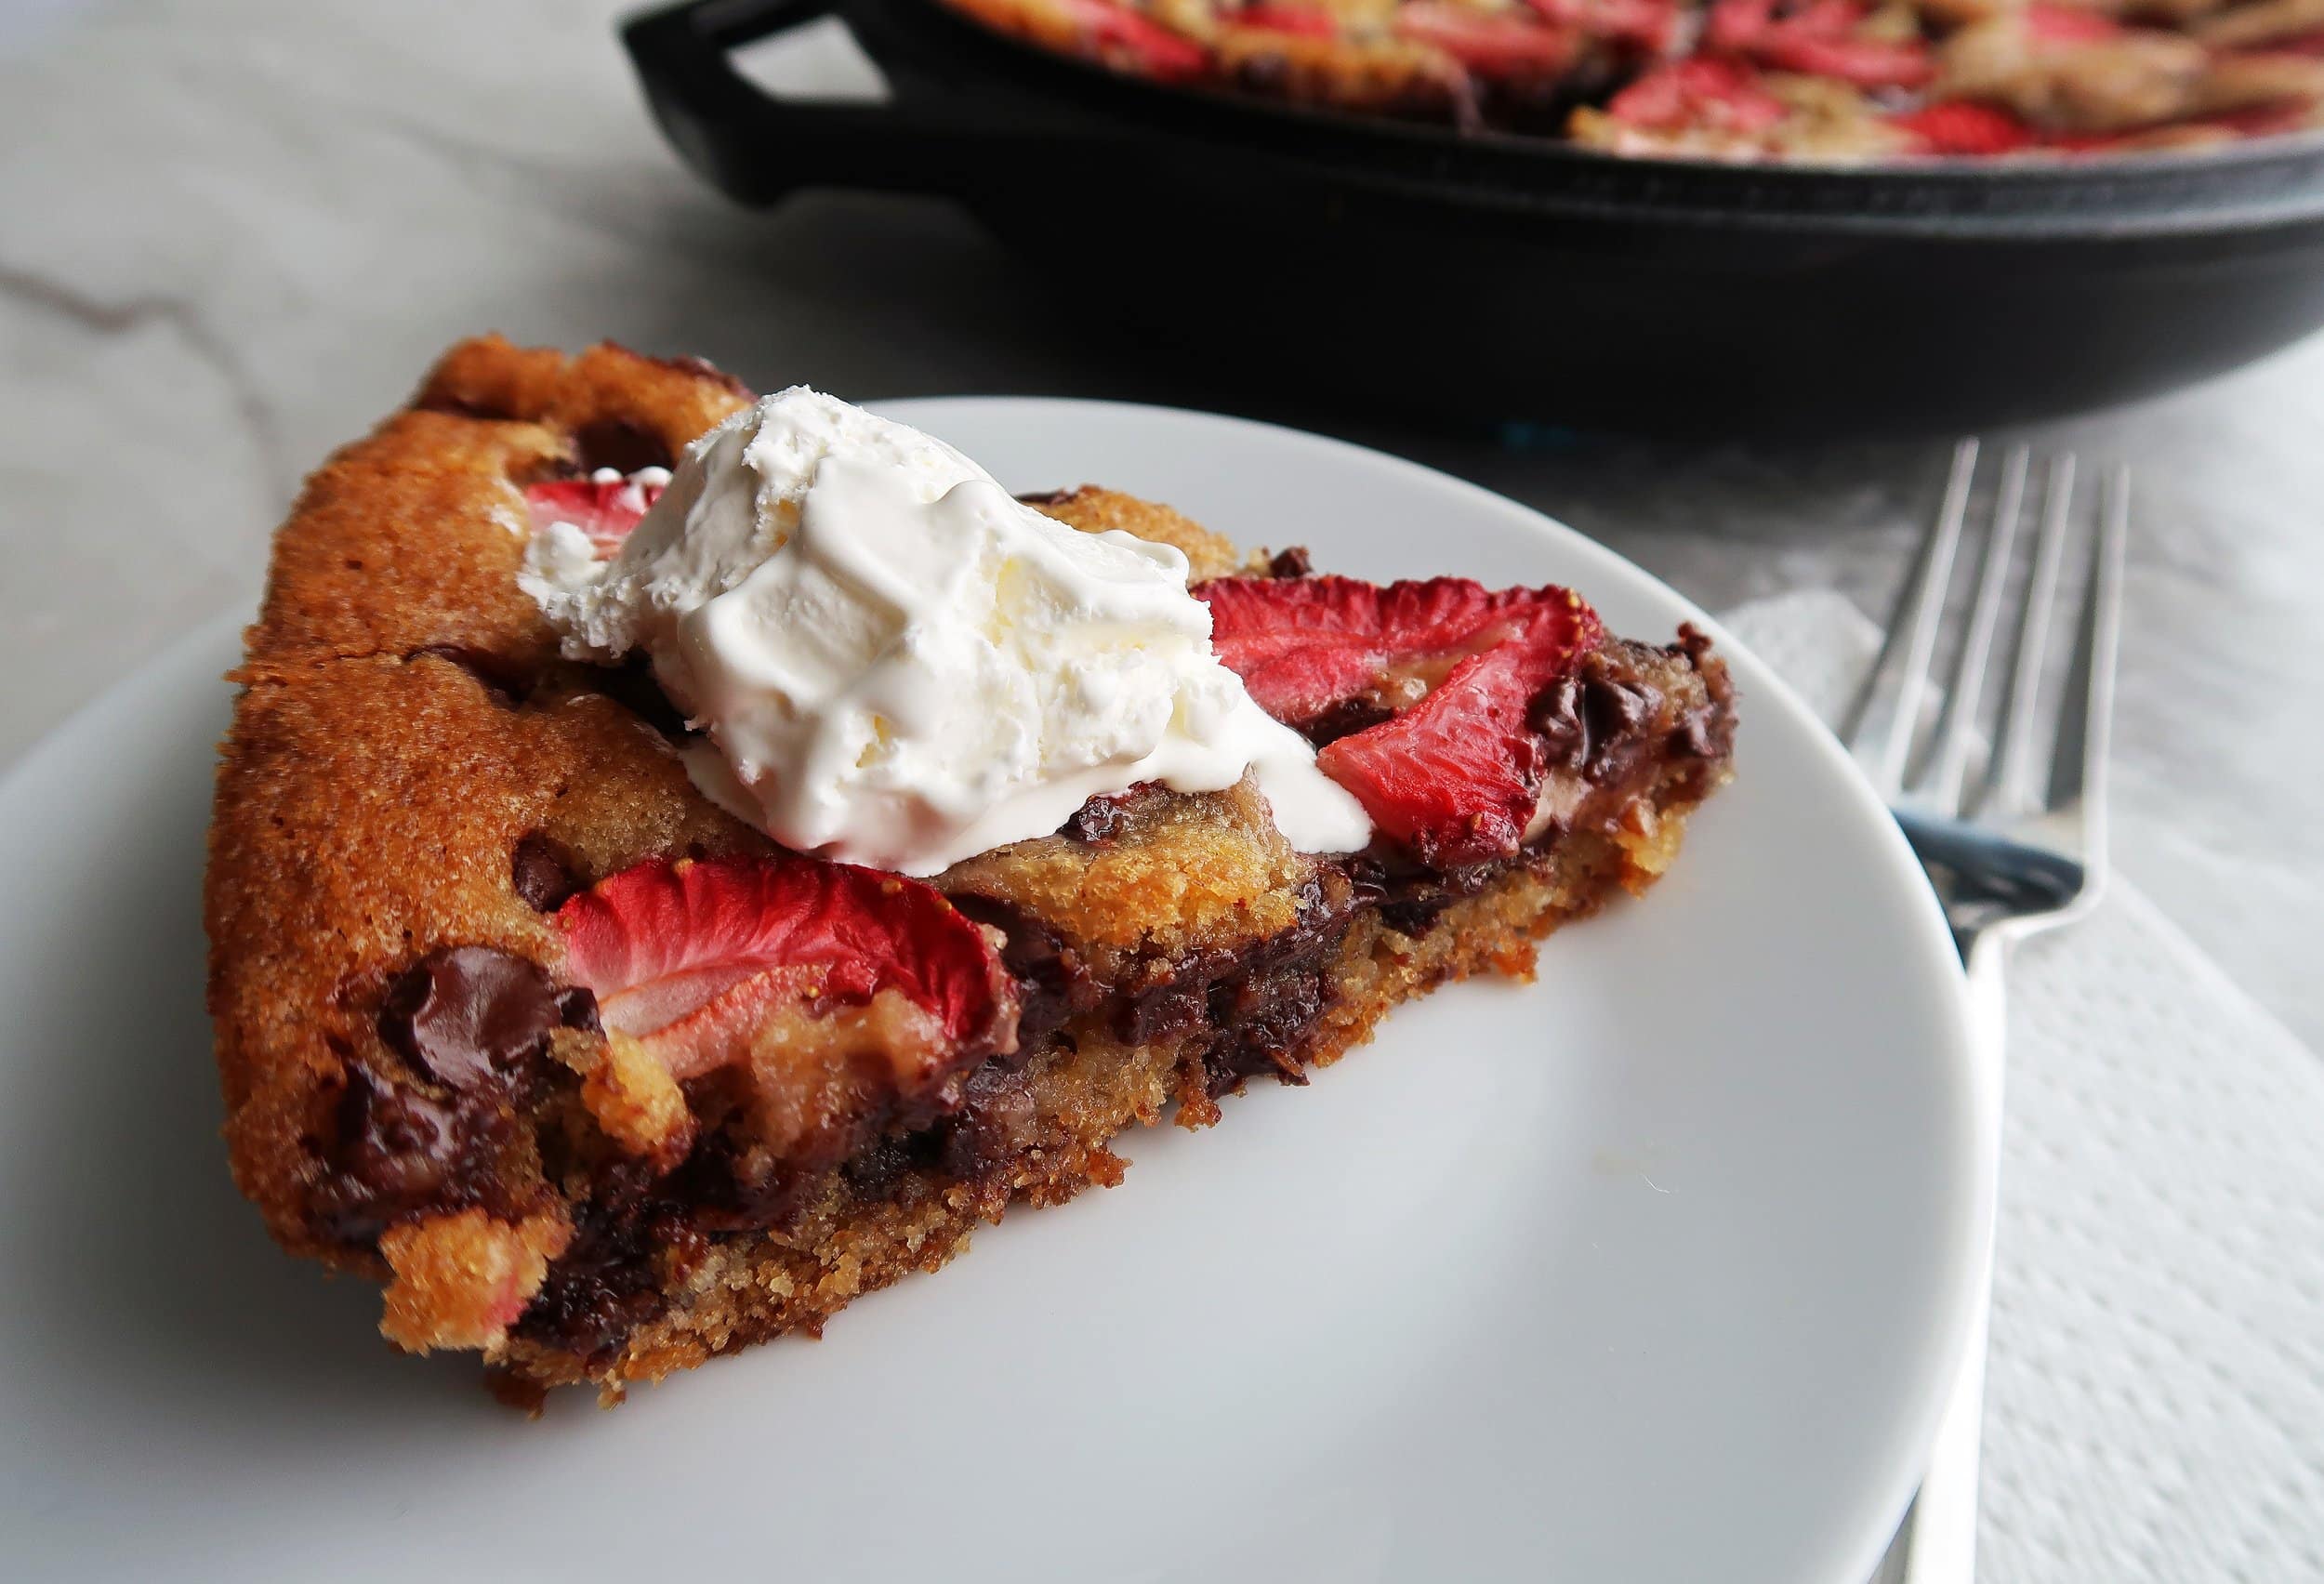 A slice of Strawberry Chocolate Chip Skillet Cookie on a plate.